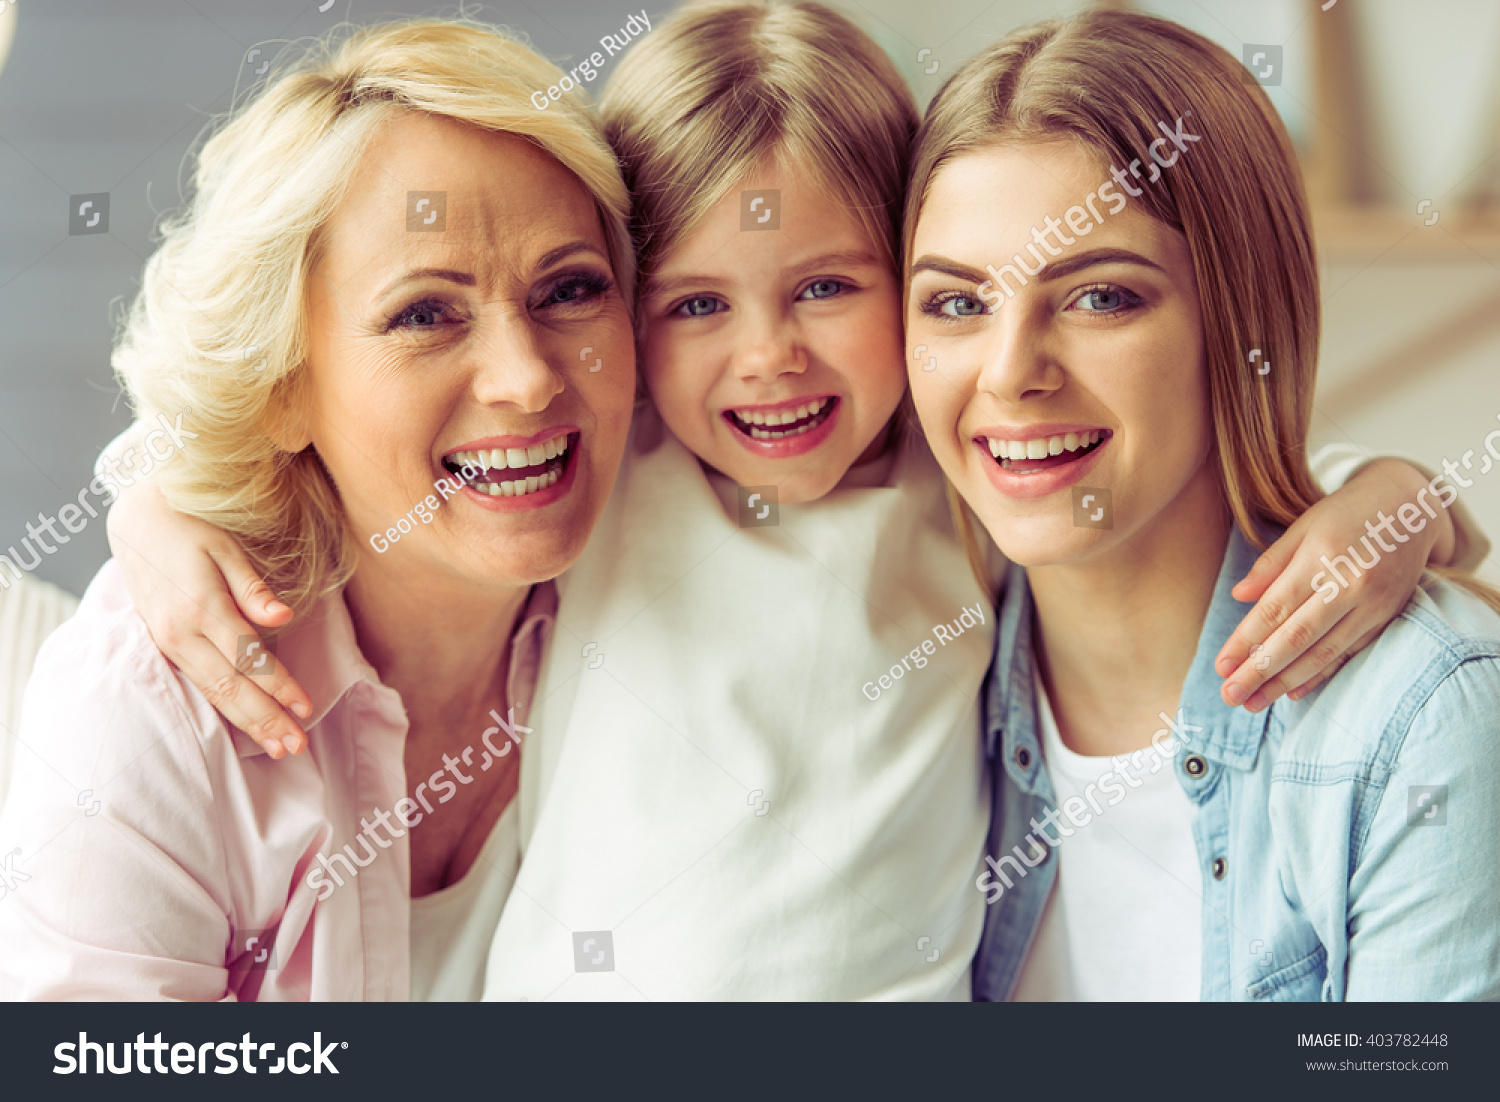 Portrait of three generations of happy beautiful women looking at camera, hugging and smiling #403782448